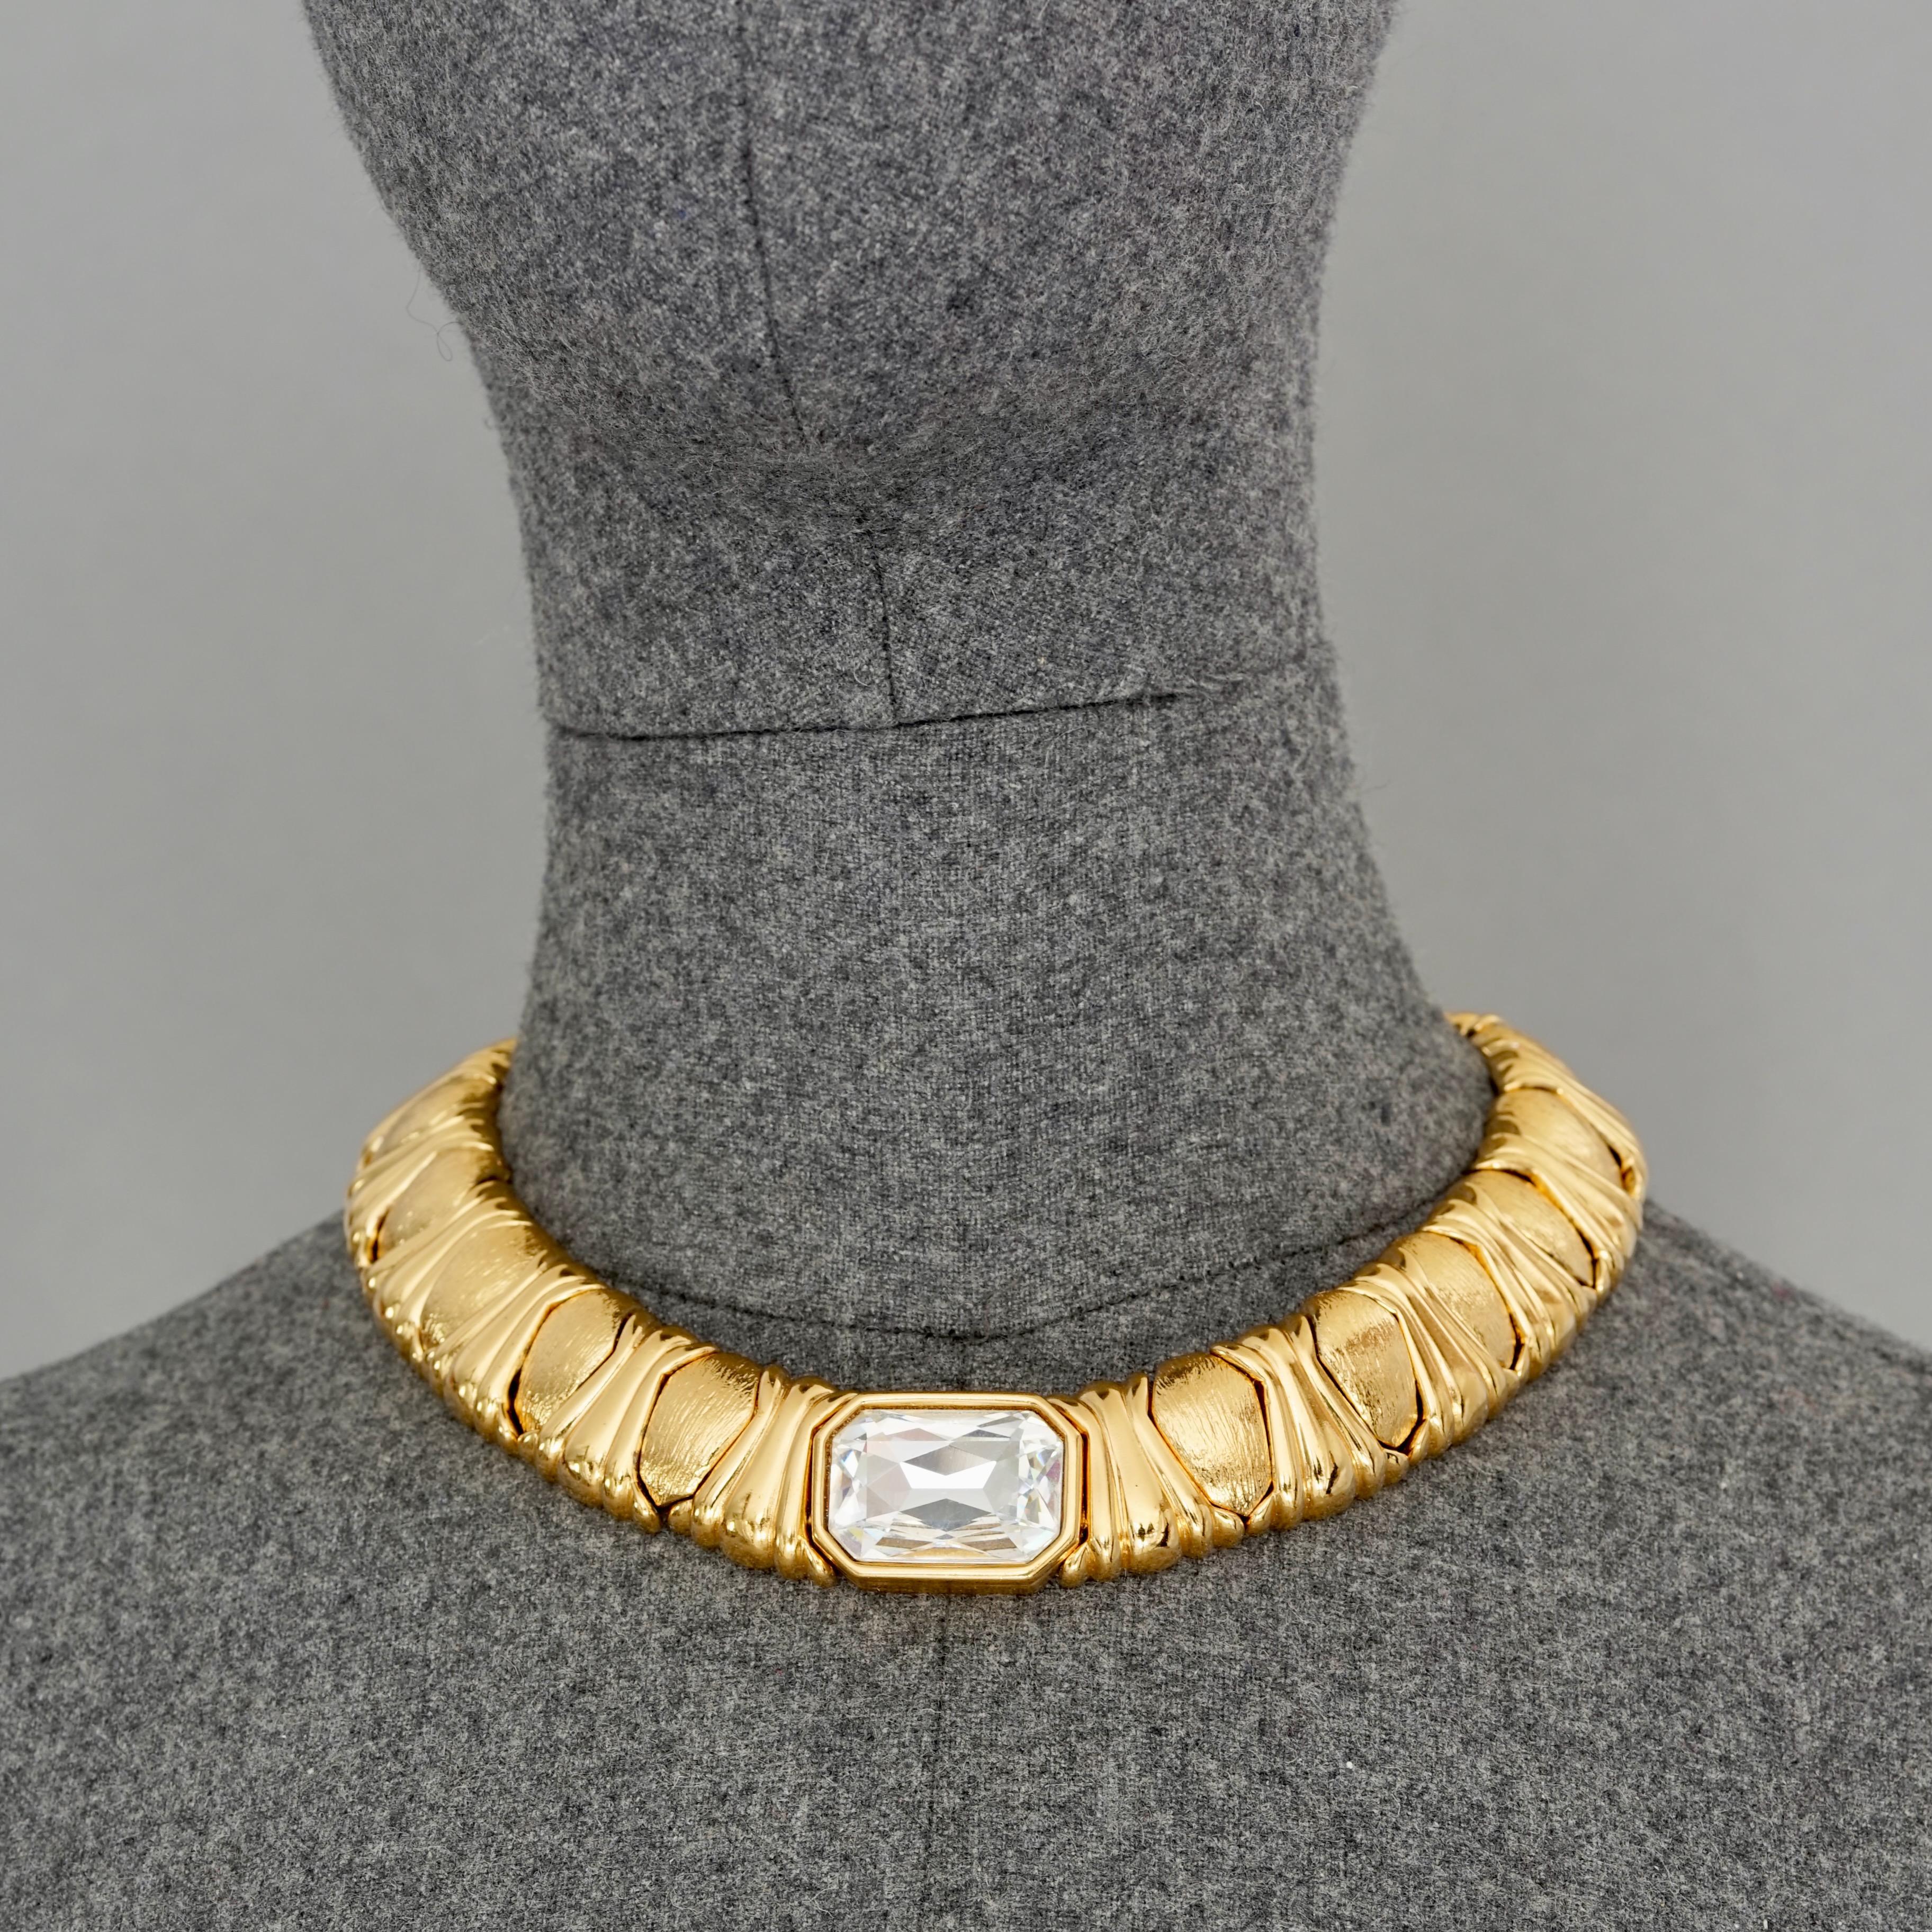 Vintage YVES SAINT LAURENT Ysl Rhinestone Choker Necklace

Measurements:
Centrepiece Height: 4.21 inches (2.3 cm)
Wearable Length: 19.09 inches (39 cm)

Features:
- 100% Authentic YVES SAINT LAURENT by Robert Goossens.
- Centrepiece is embellished